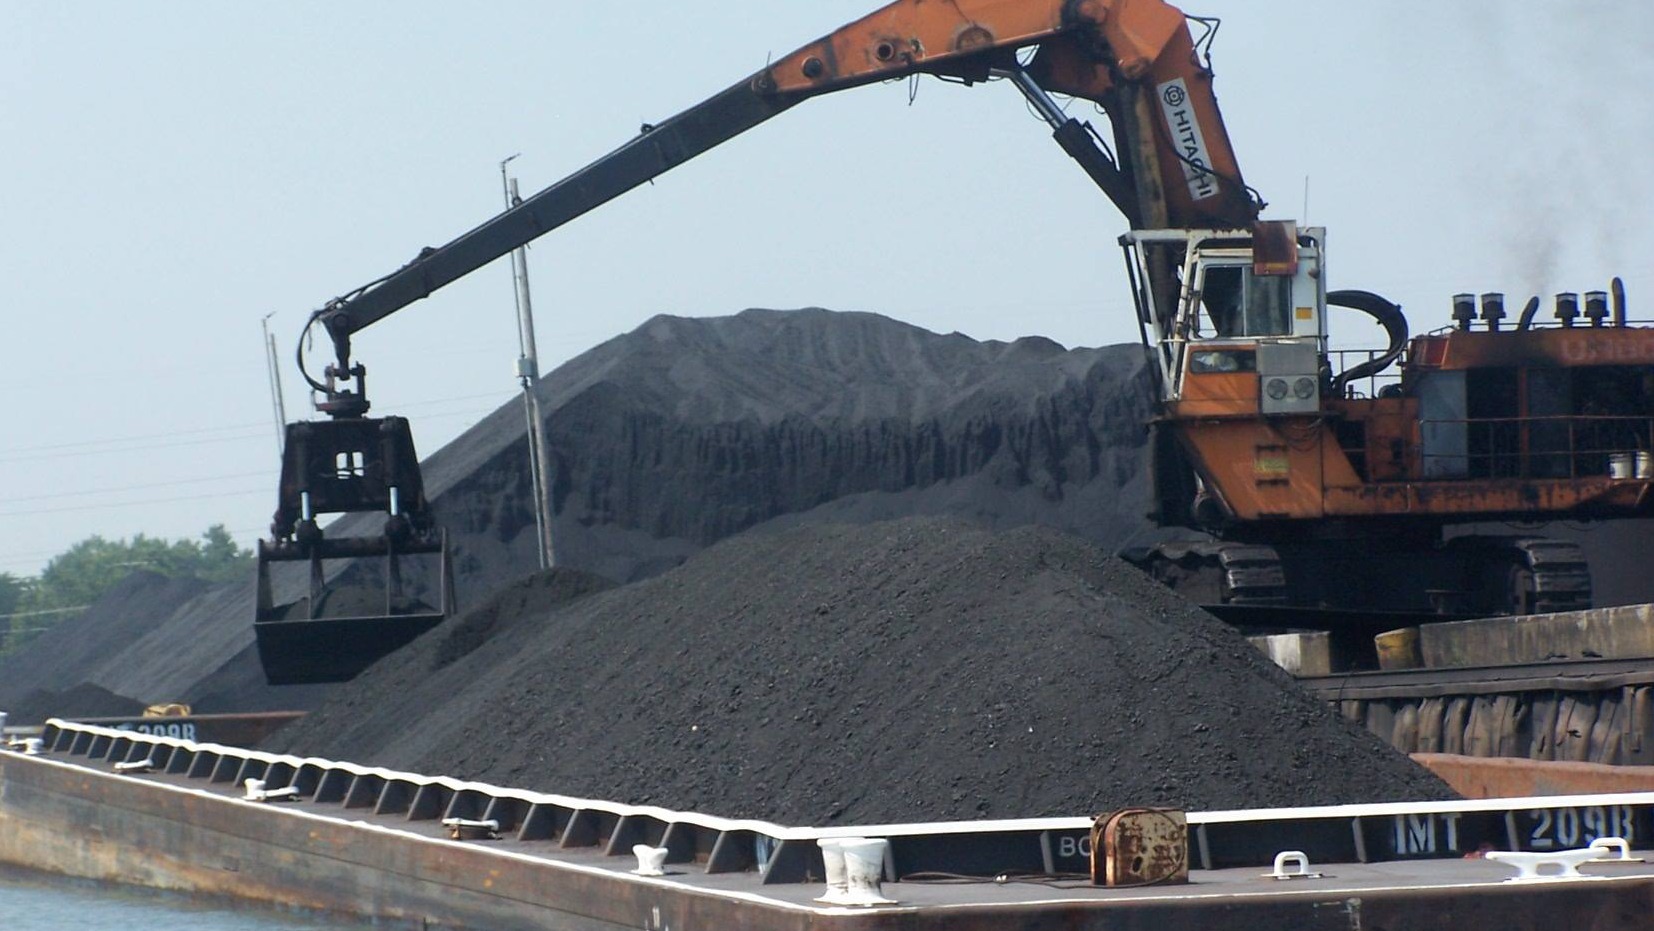 One of the petcoke piles in Chicago